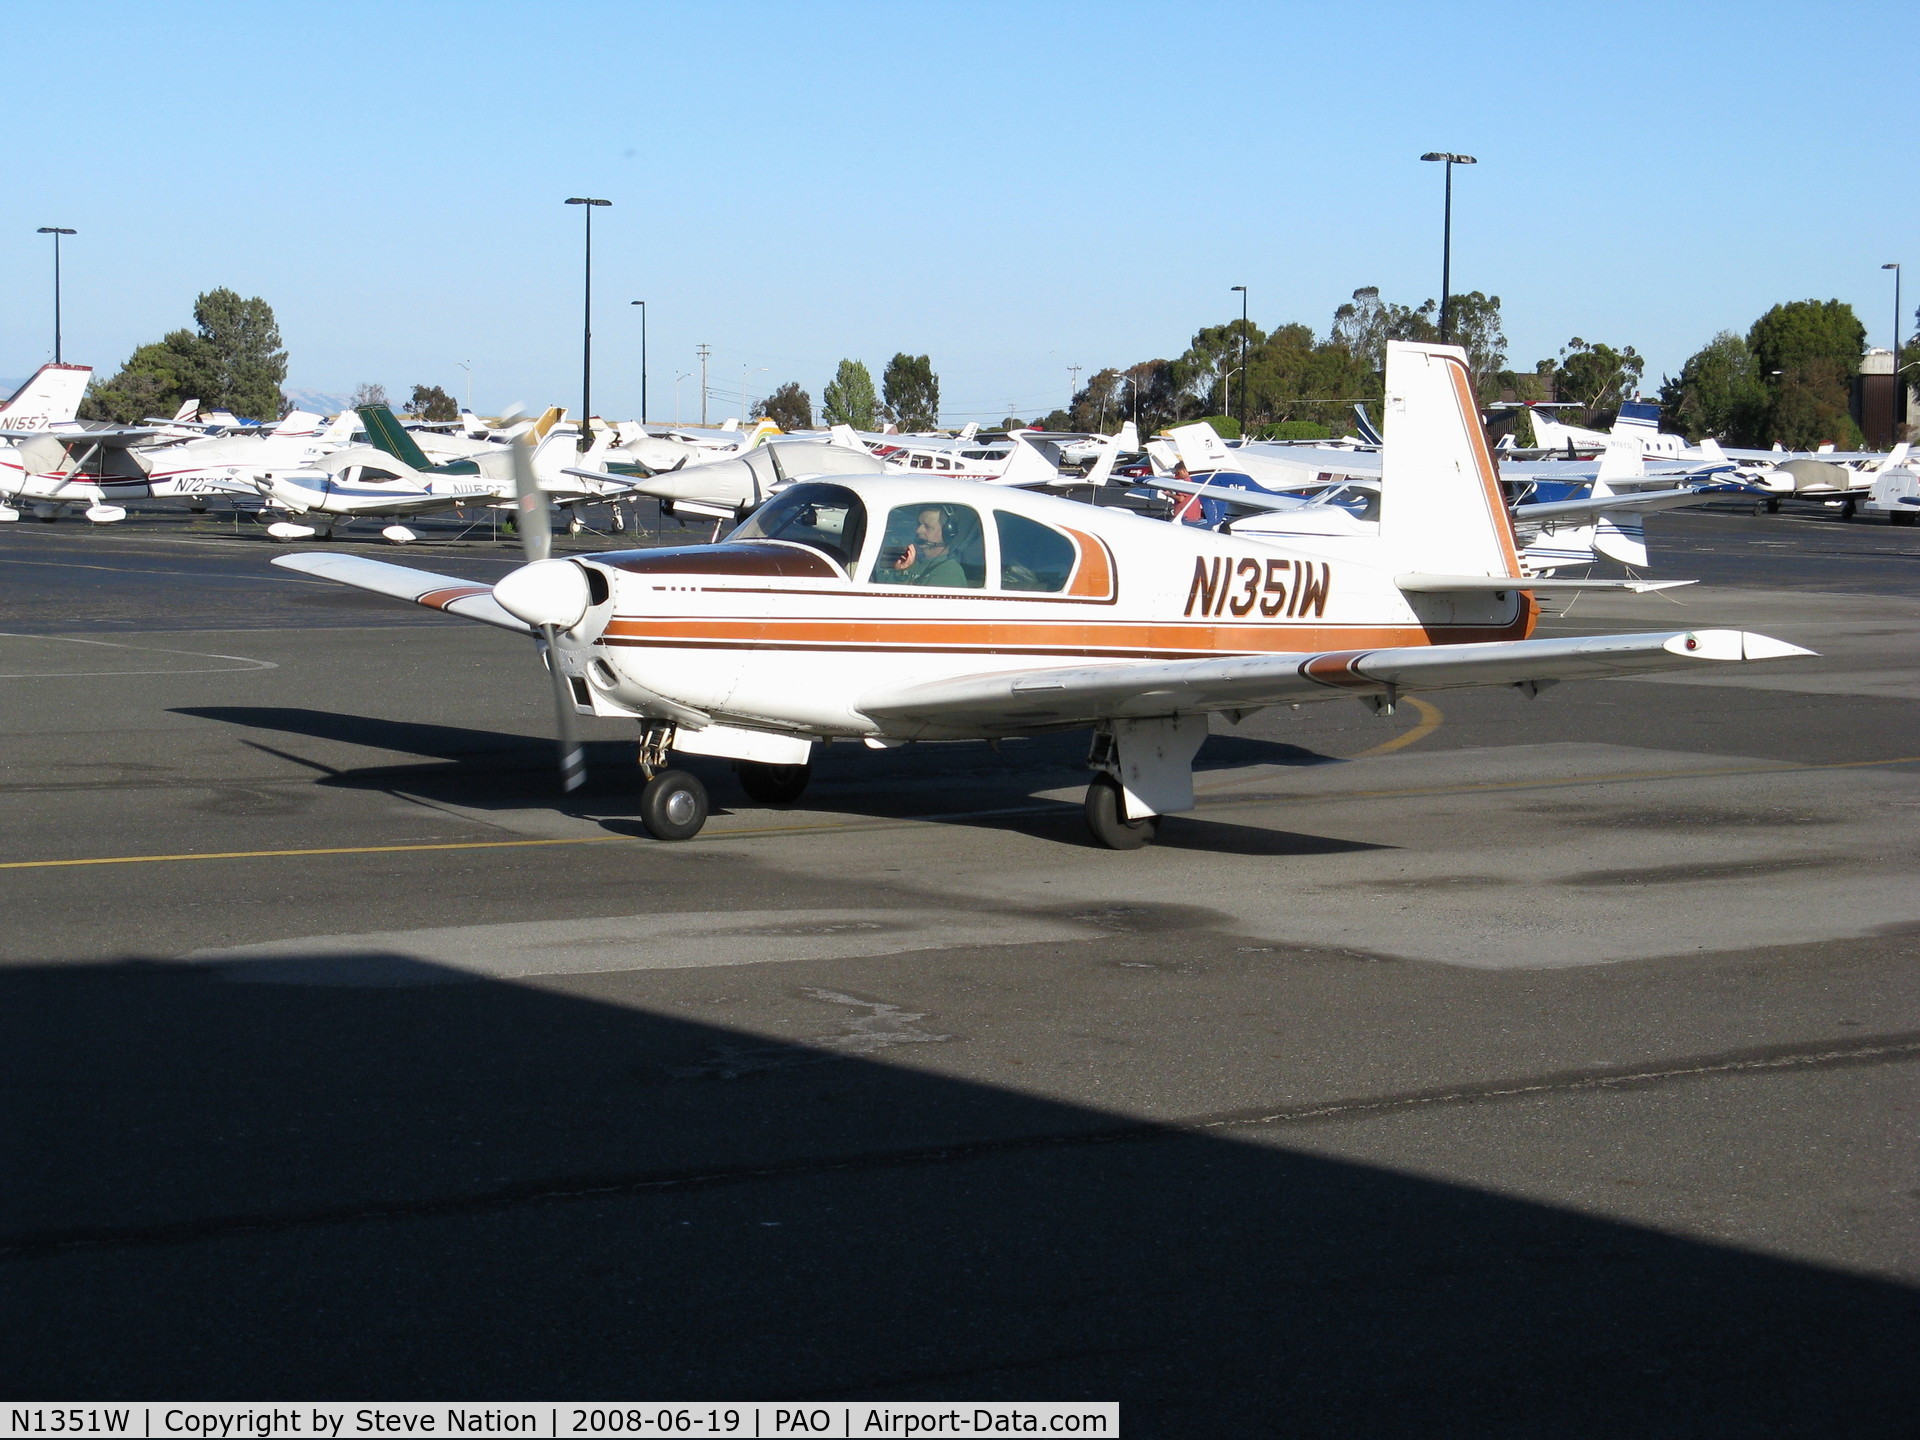 N1351W, 1963 Mooney M20C Ranger C/N 2632, 1963 Mooney M20C taxying in late afternoon sunshine @ Palo Alto, CA